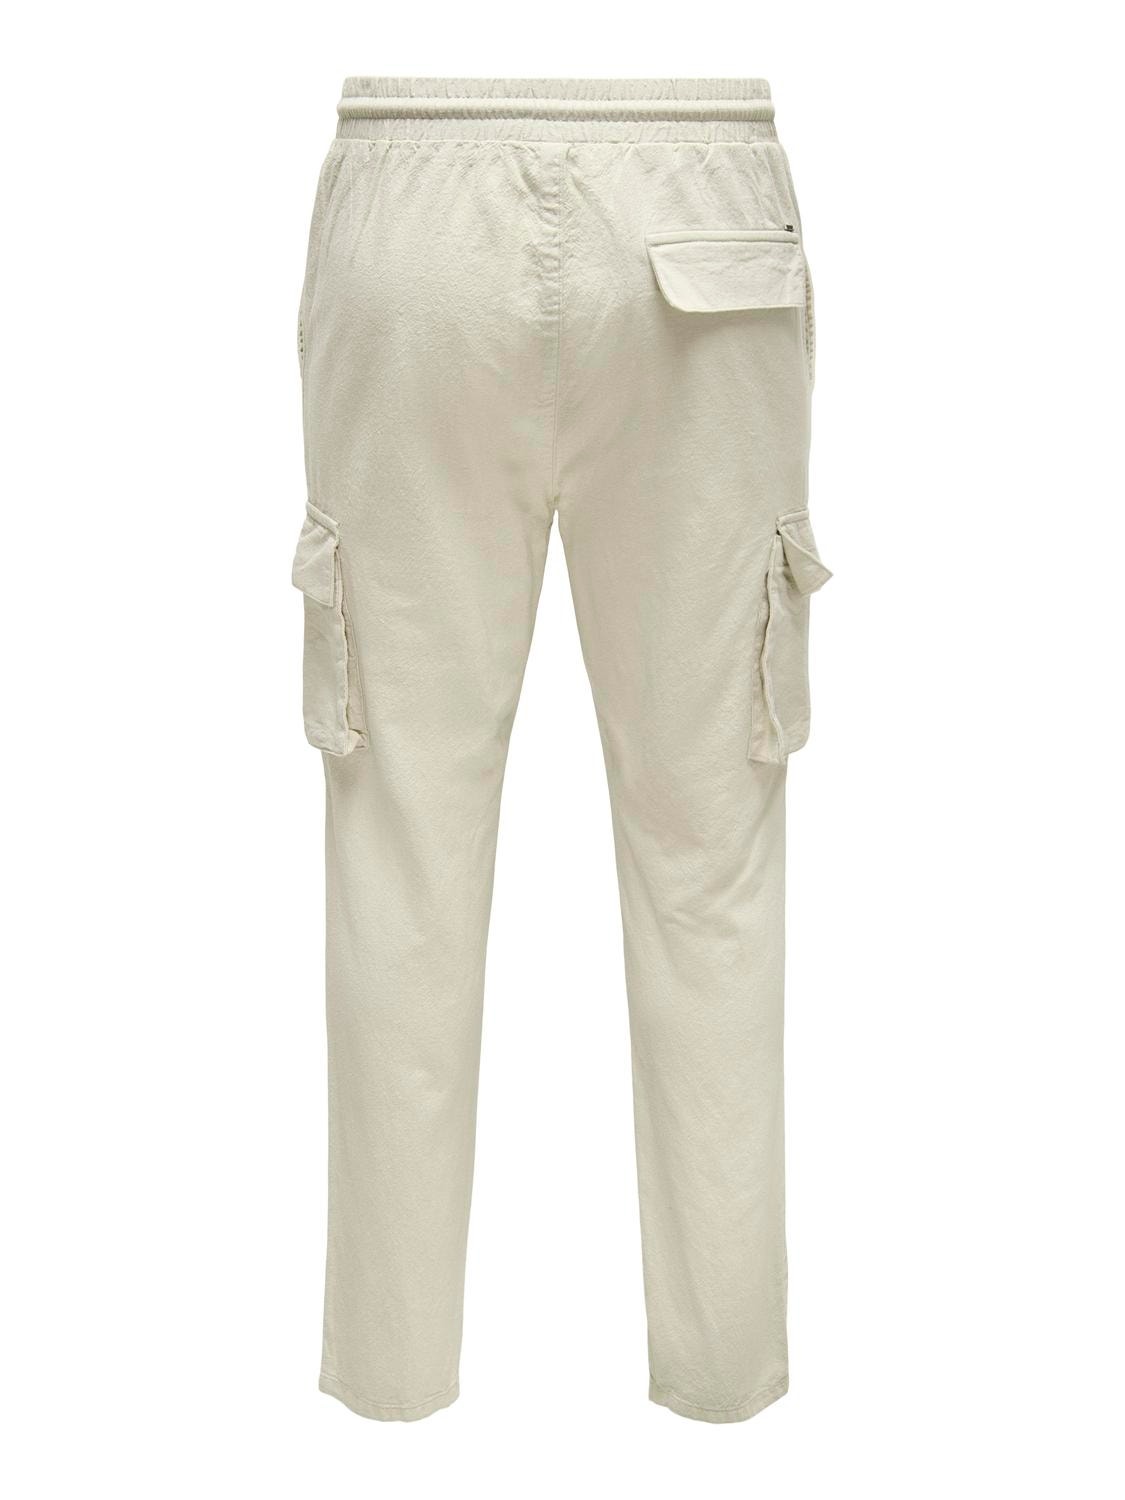 ONLY & SONS Cargo pants -Silver Lining - 22028268